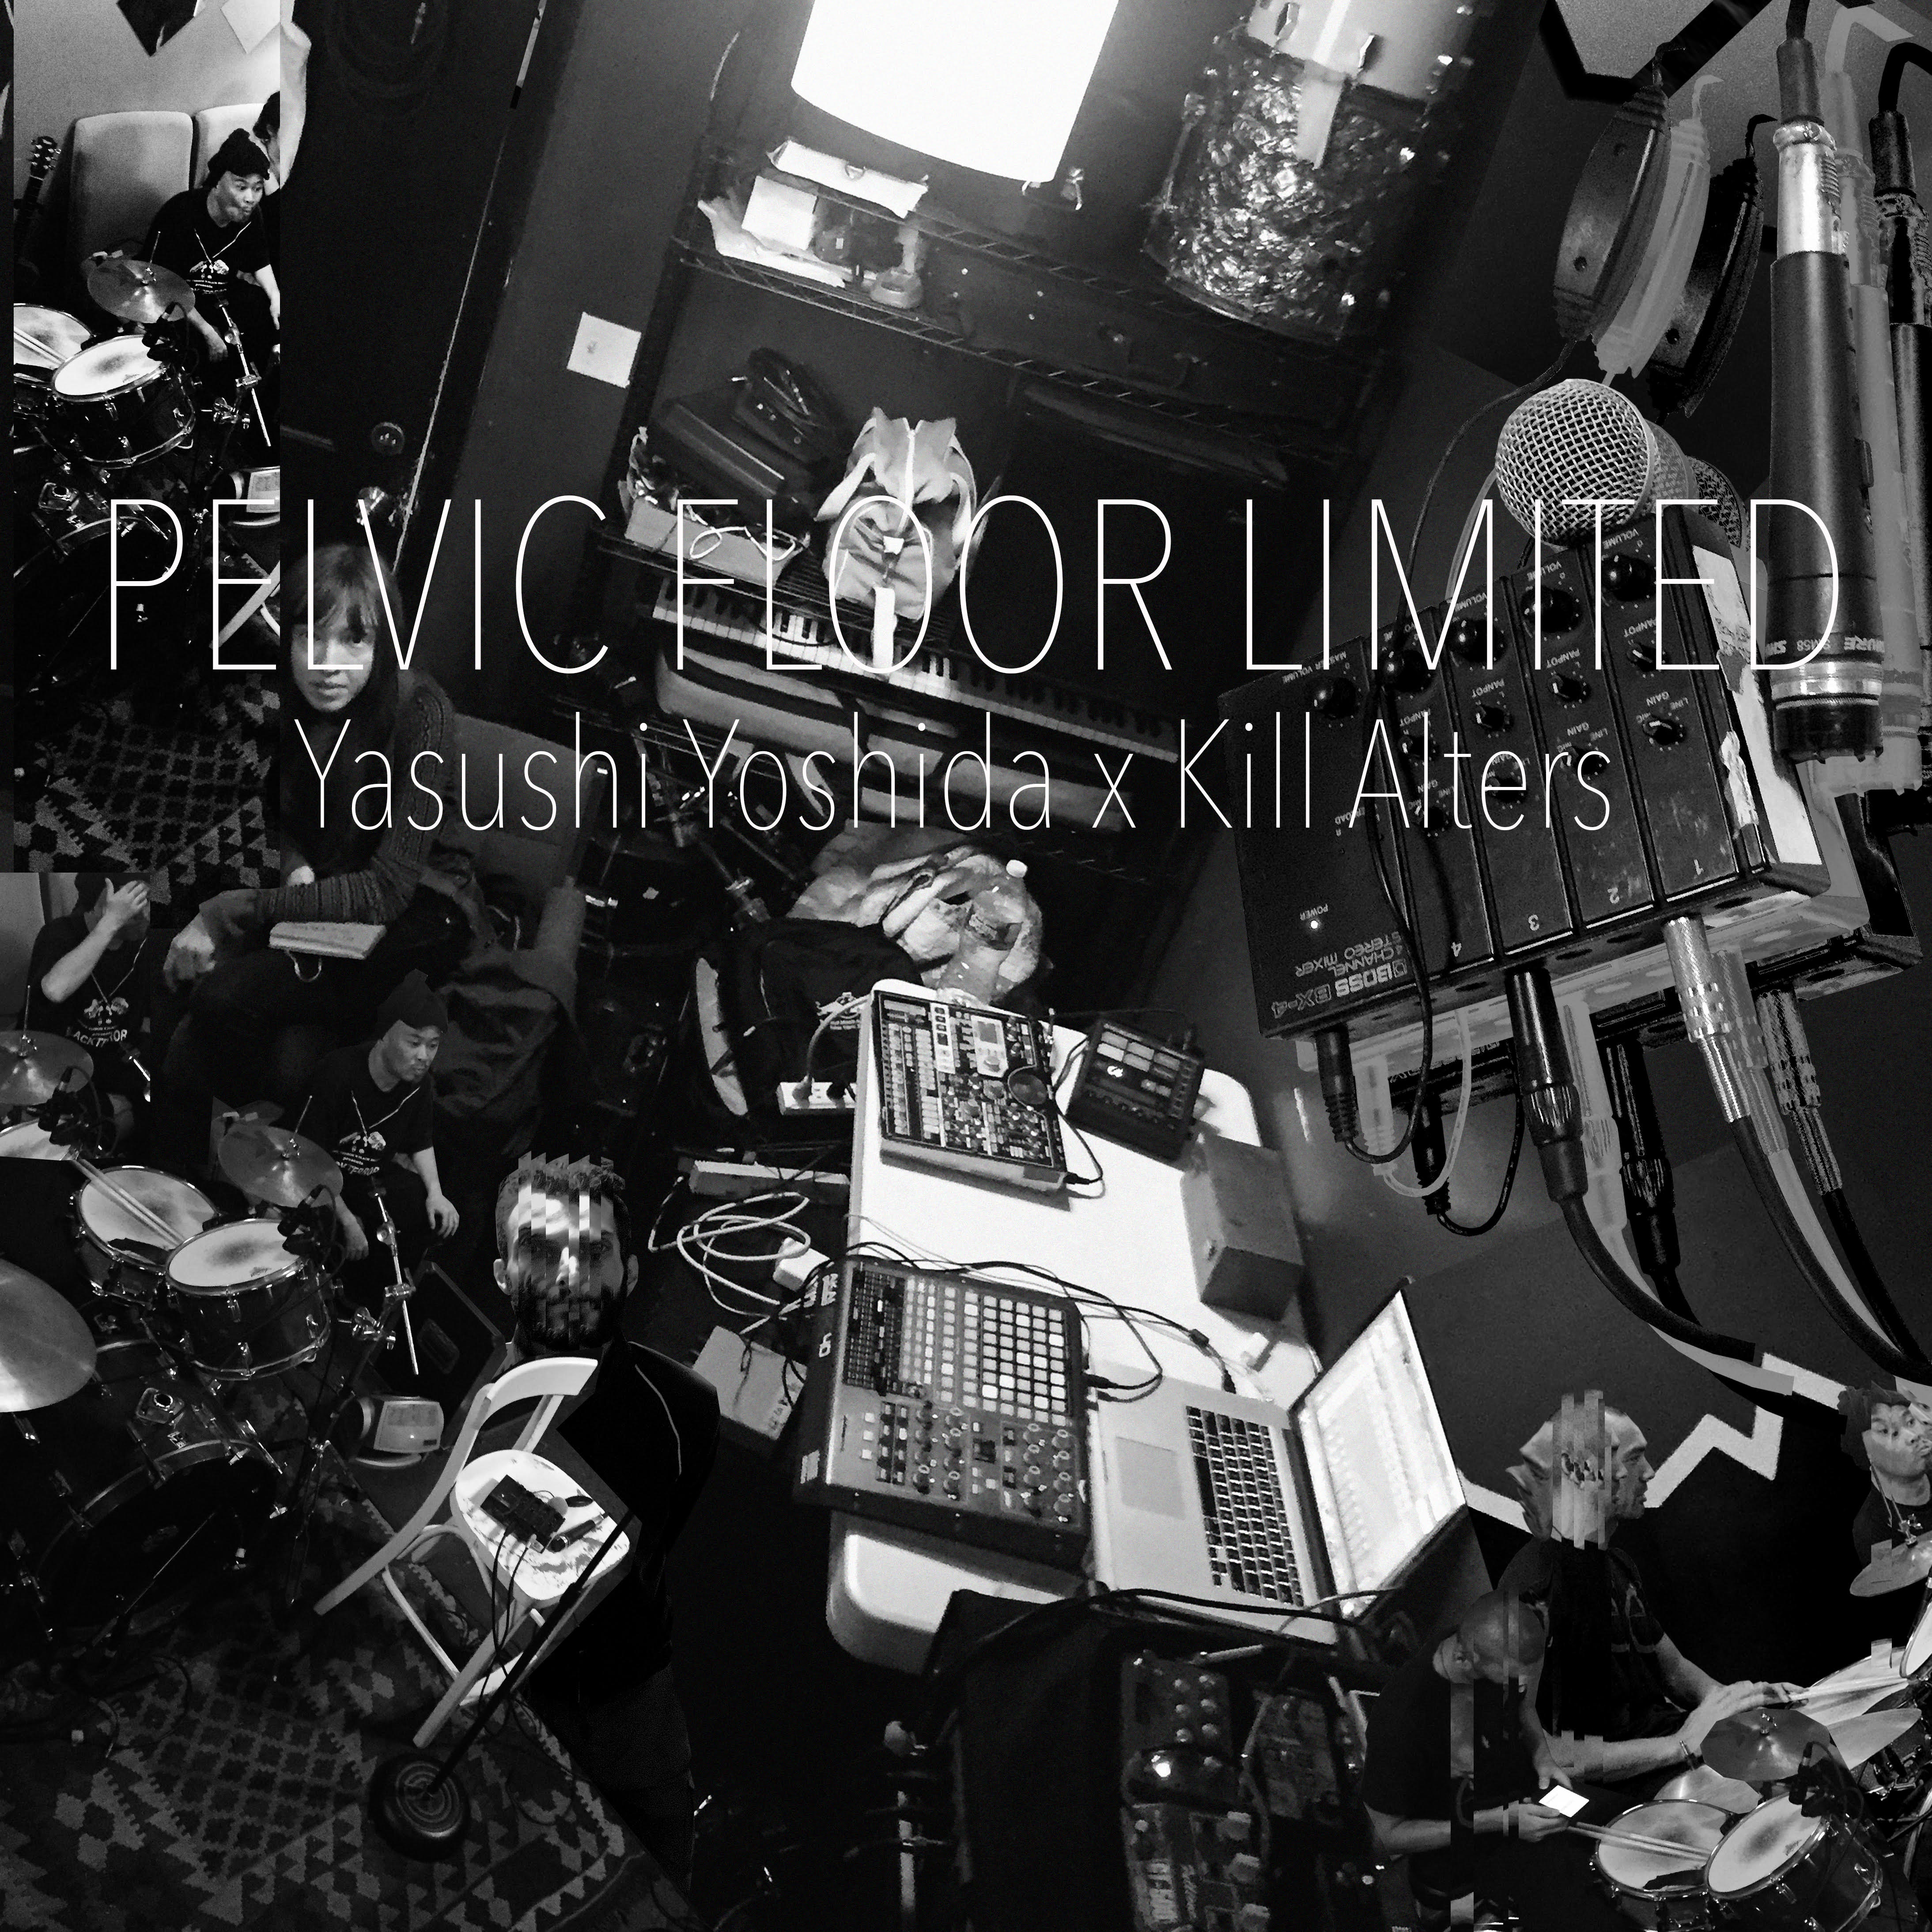 the cover art for the album 'Pelvic Floor Limited' by Yashushi Yoshida and Kill Alters